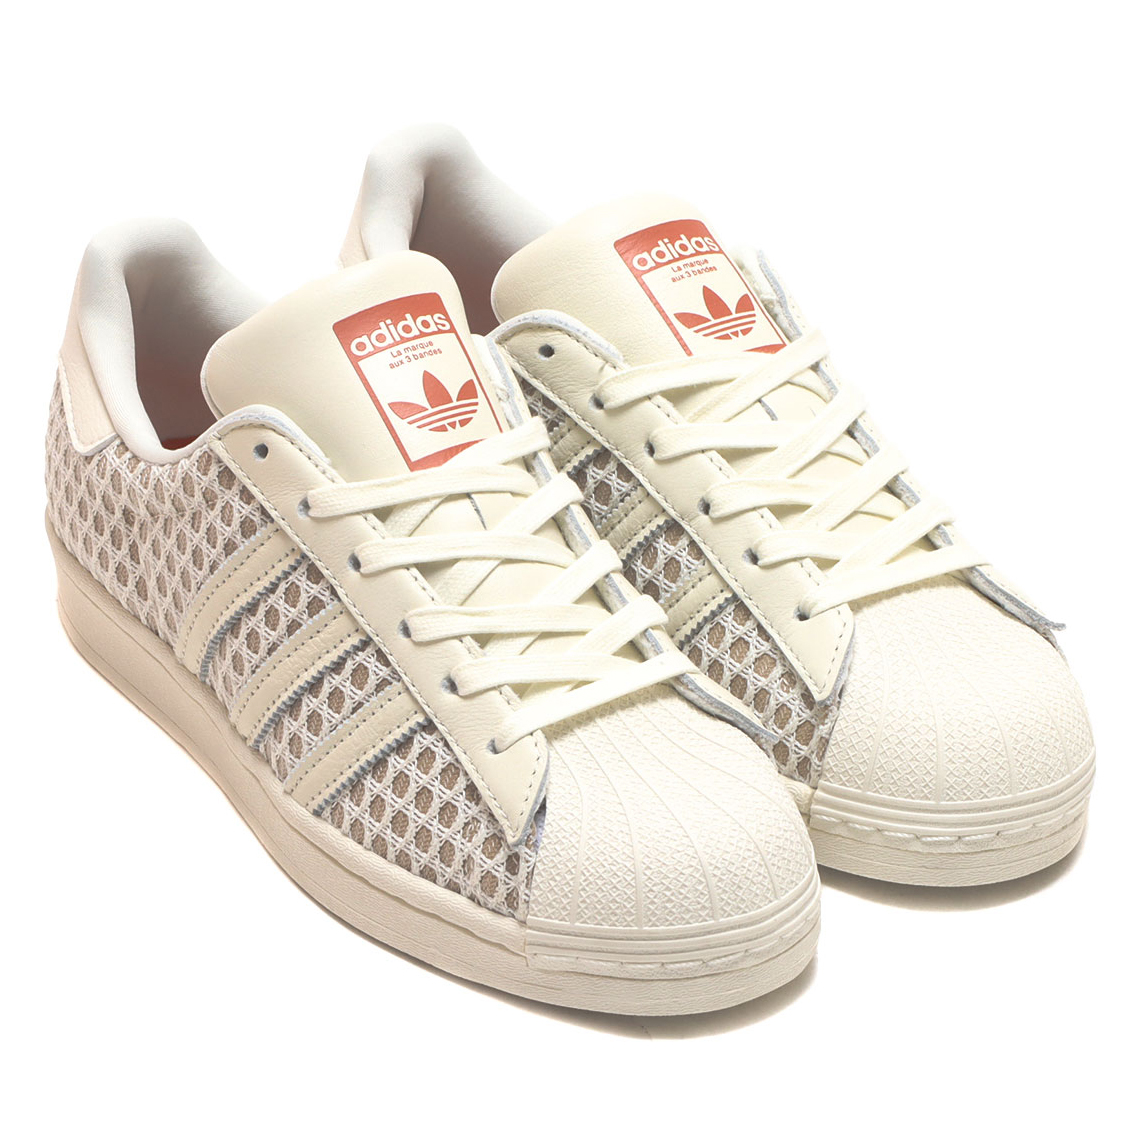 beyonce ivy park adidas Join superstar HQ8801